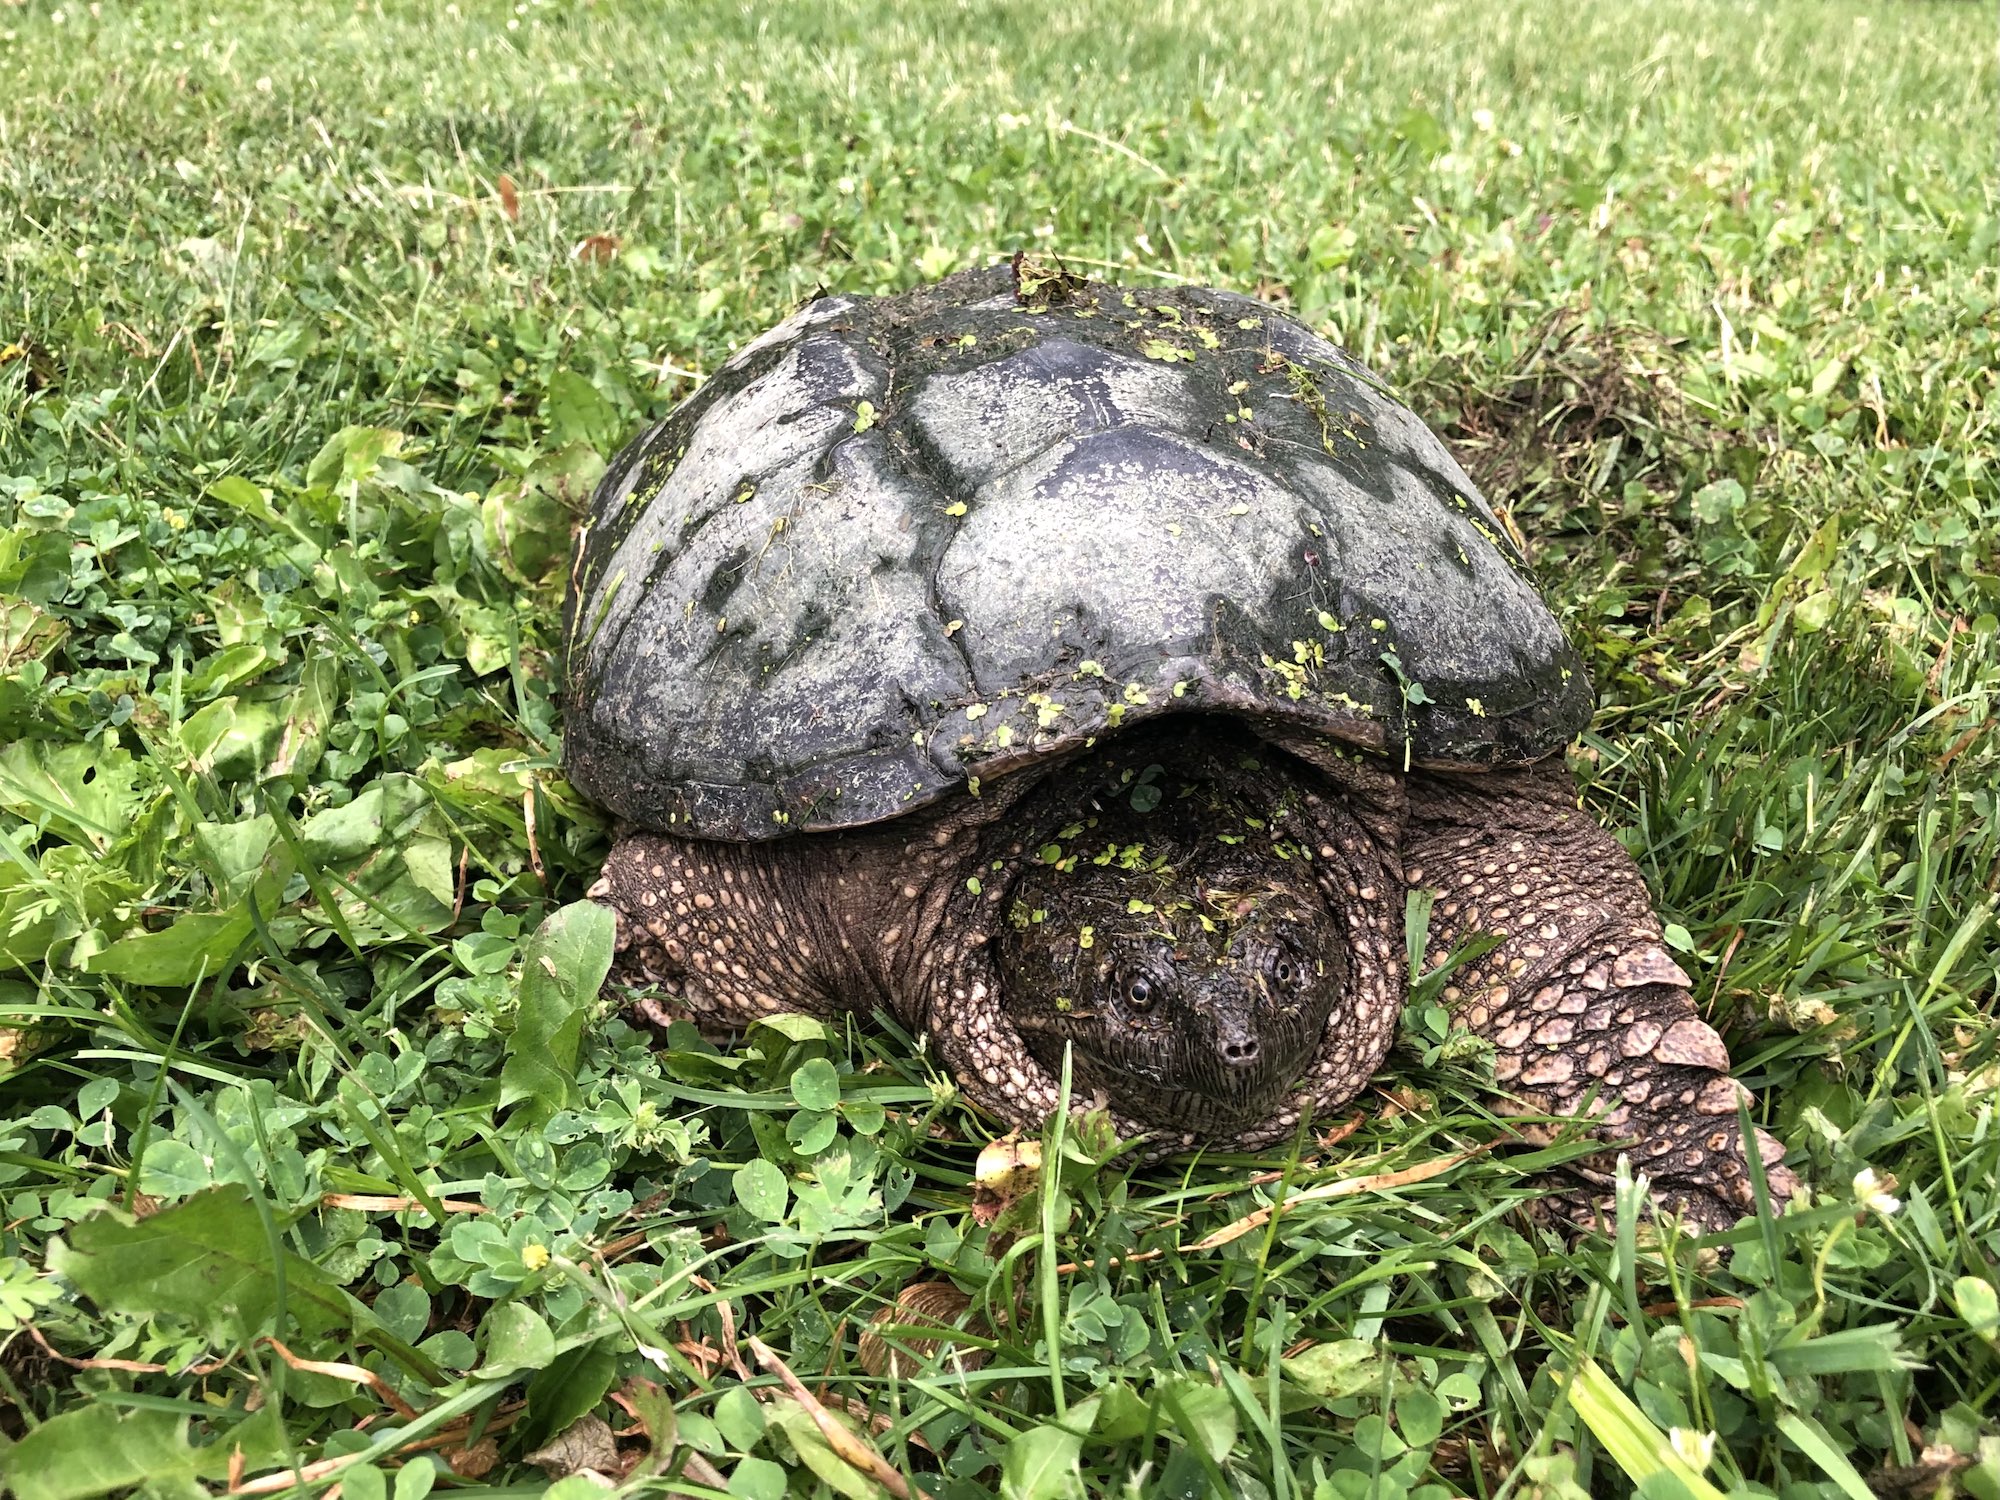 Snapping Turtle along Arbor Drive by Ho-Nee-Um Pond in Madison, Wisconsin on June 4, 2021.